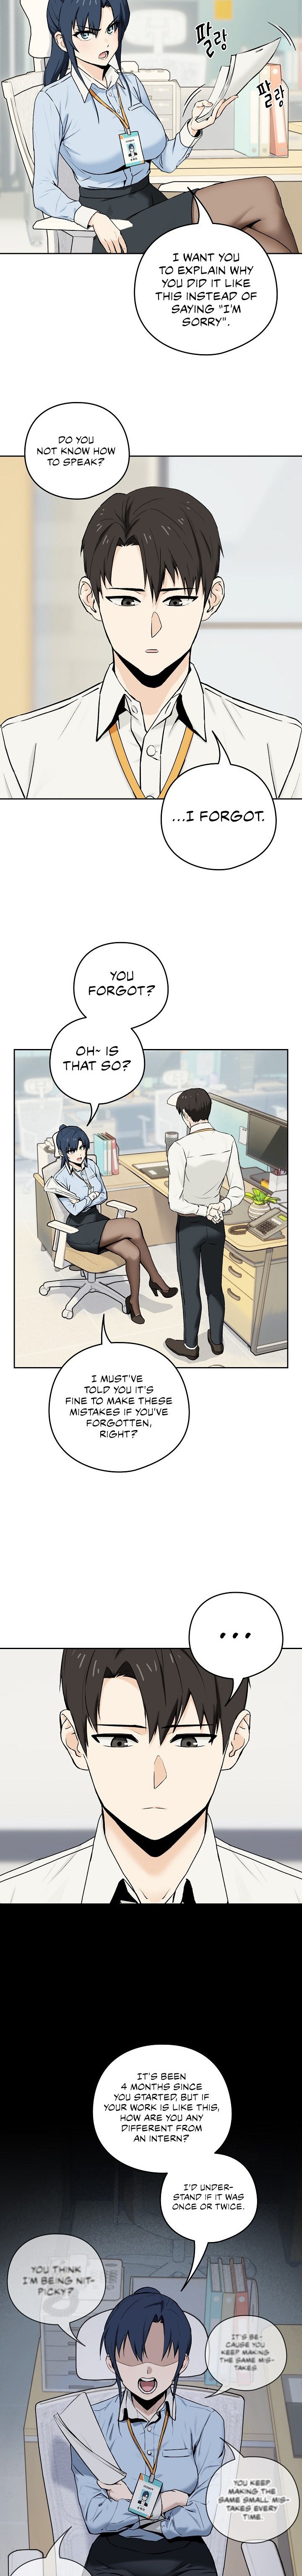 After Work Love Affairs - Chapter 1 Page 2